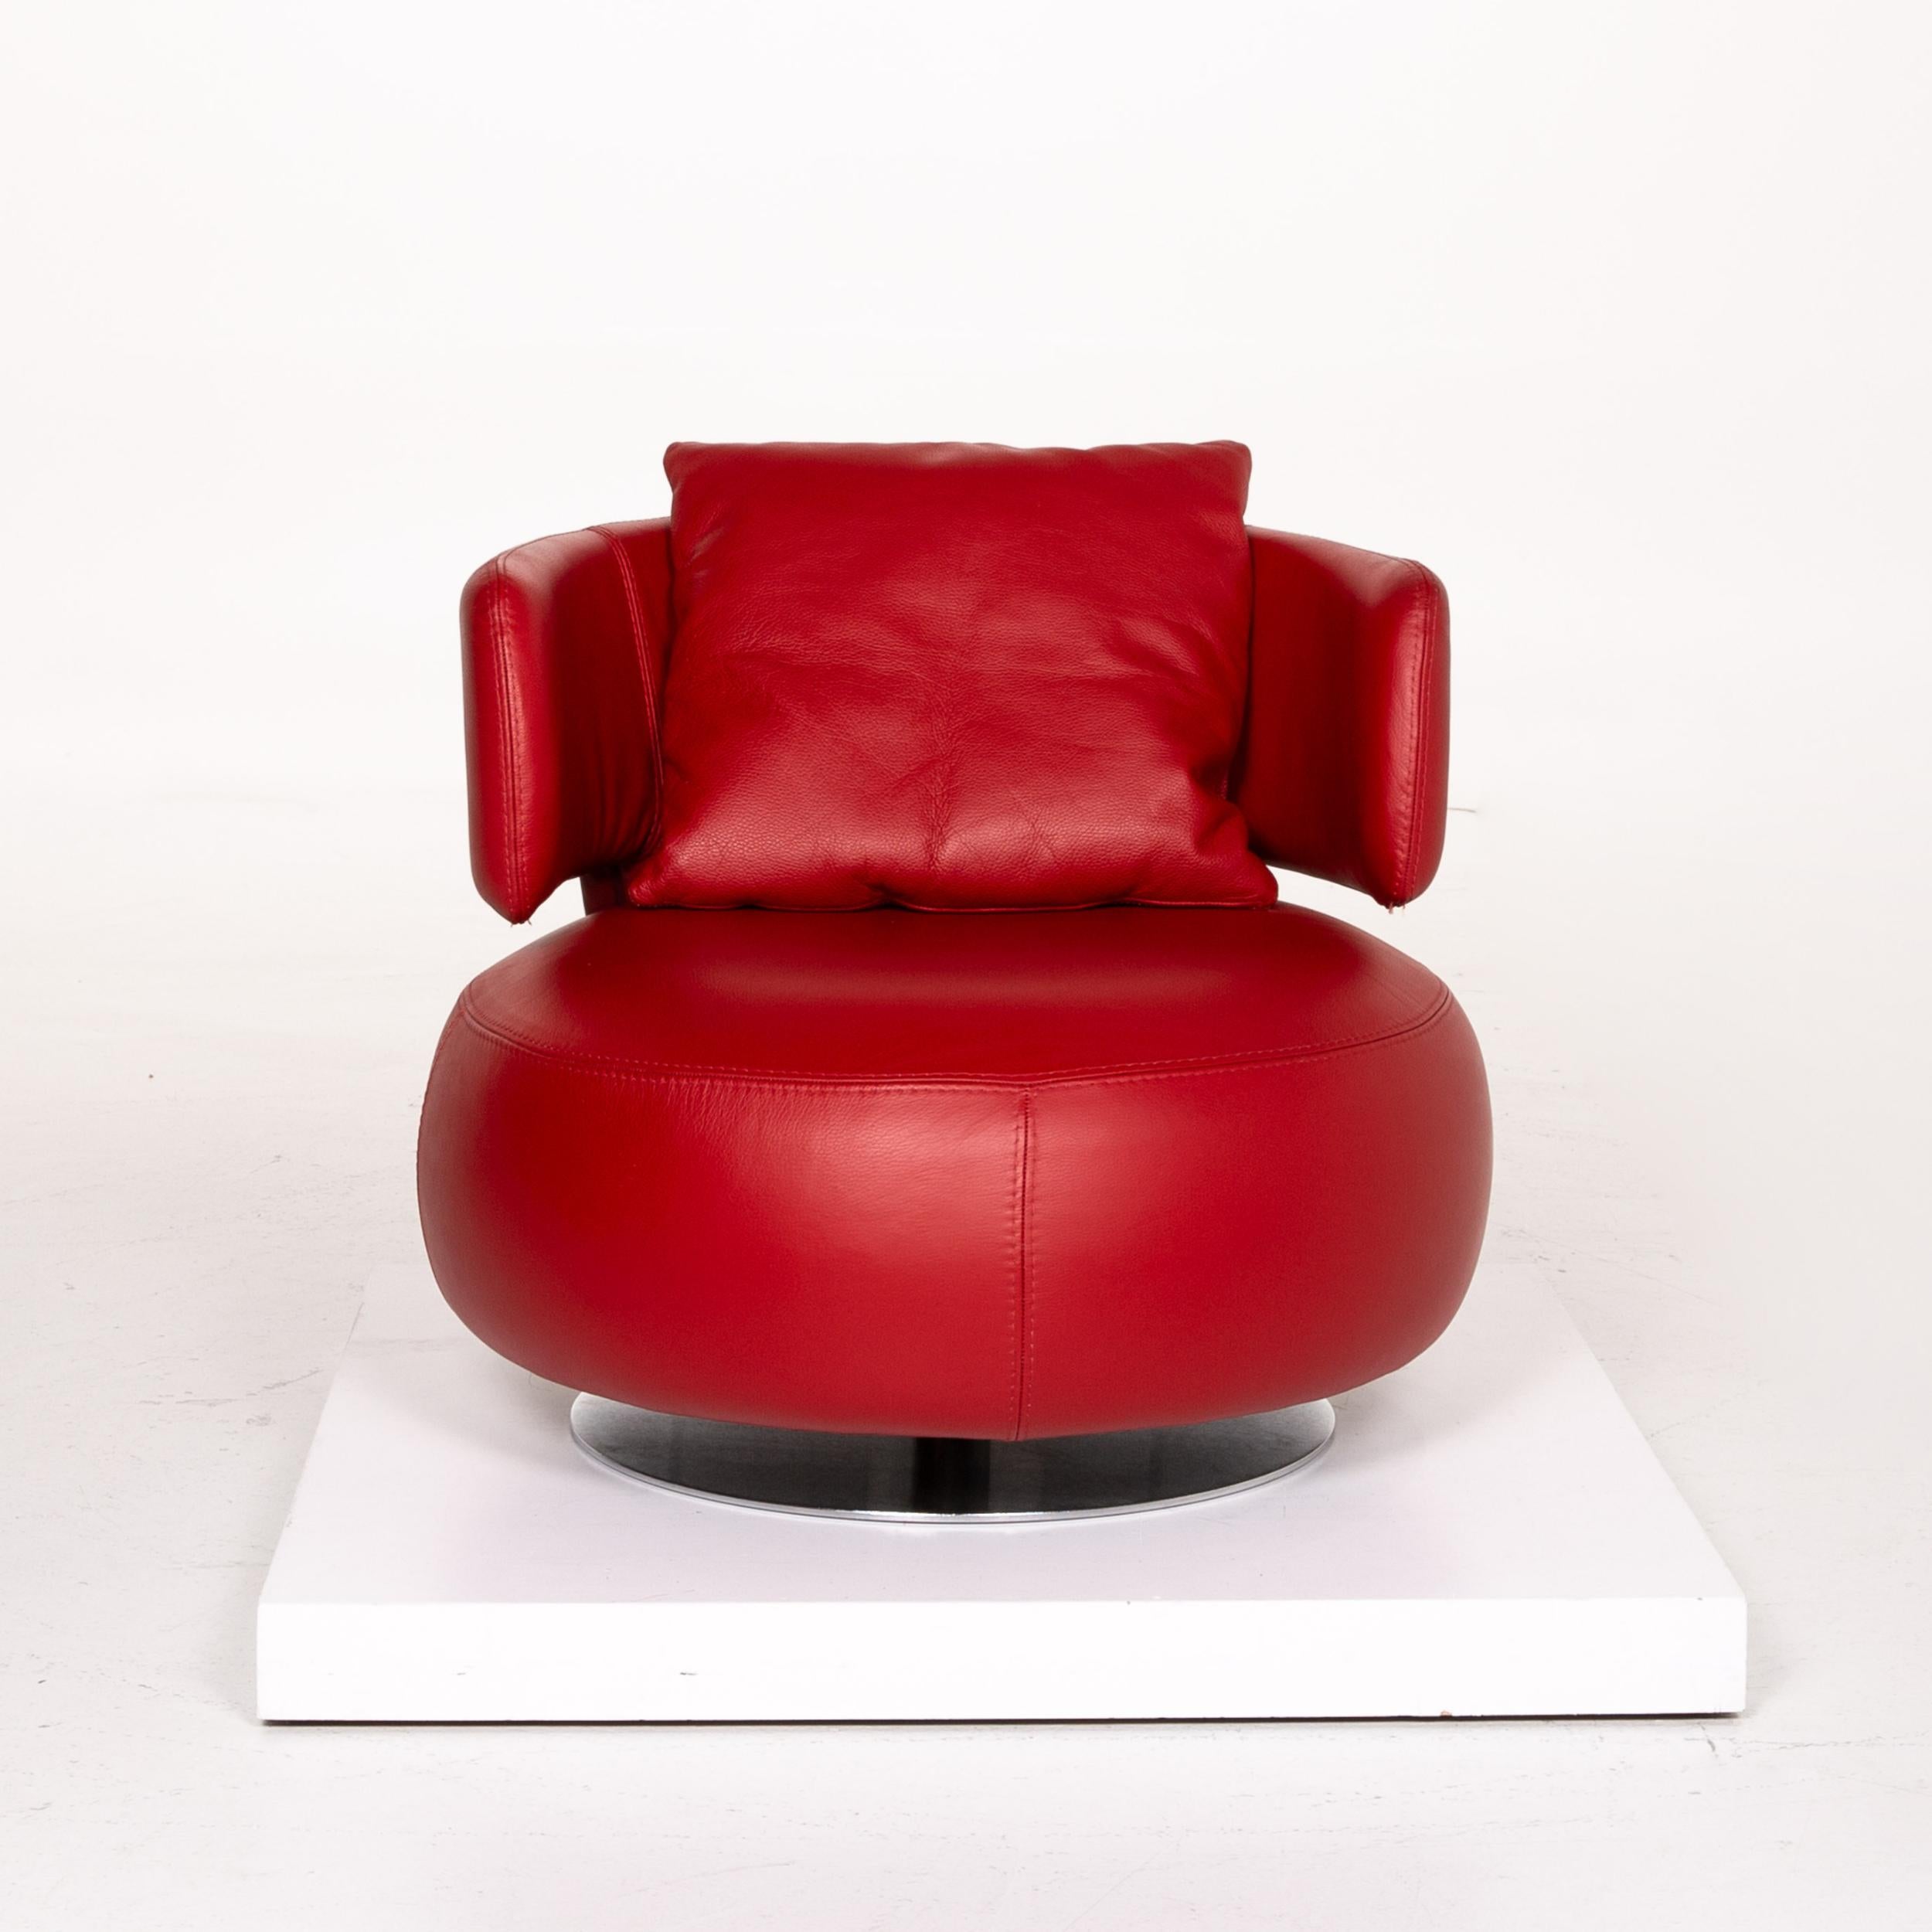 Contemporary Roche Bobois Curl Leather Armchair Red Swivel